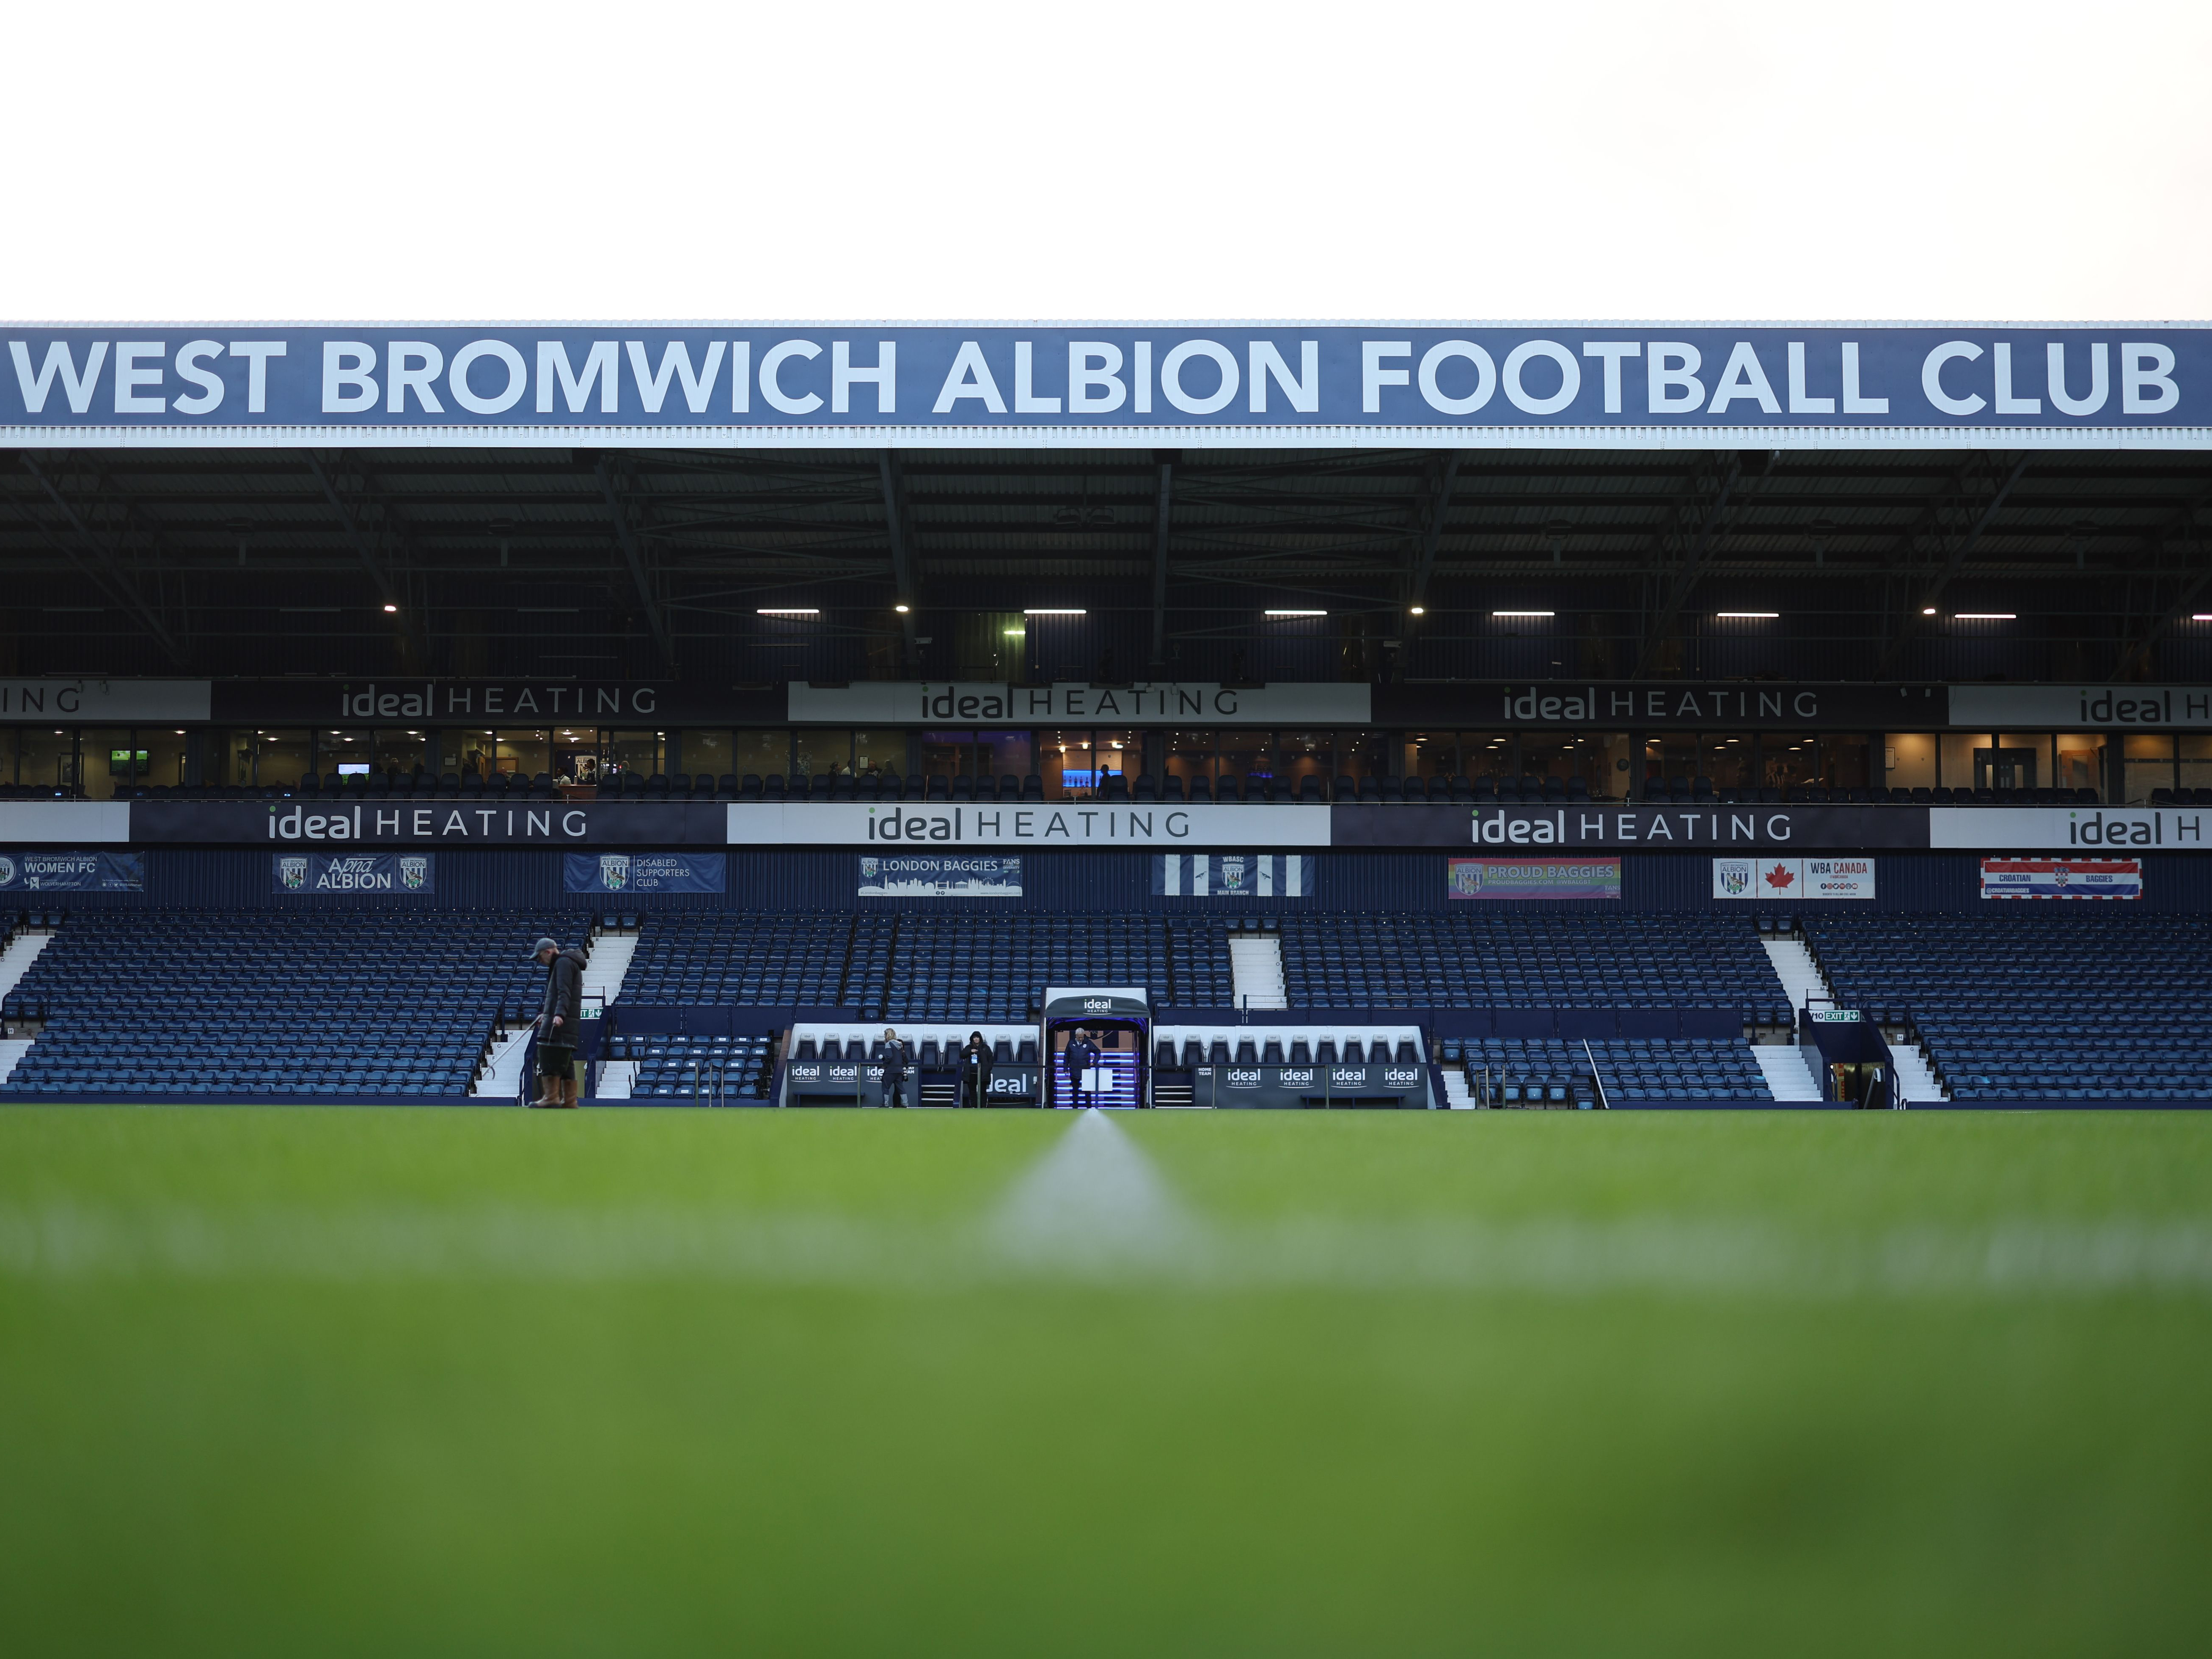 An image of West Bromwich Albion's West Stand